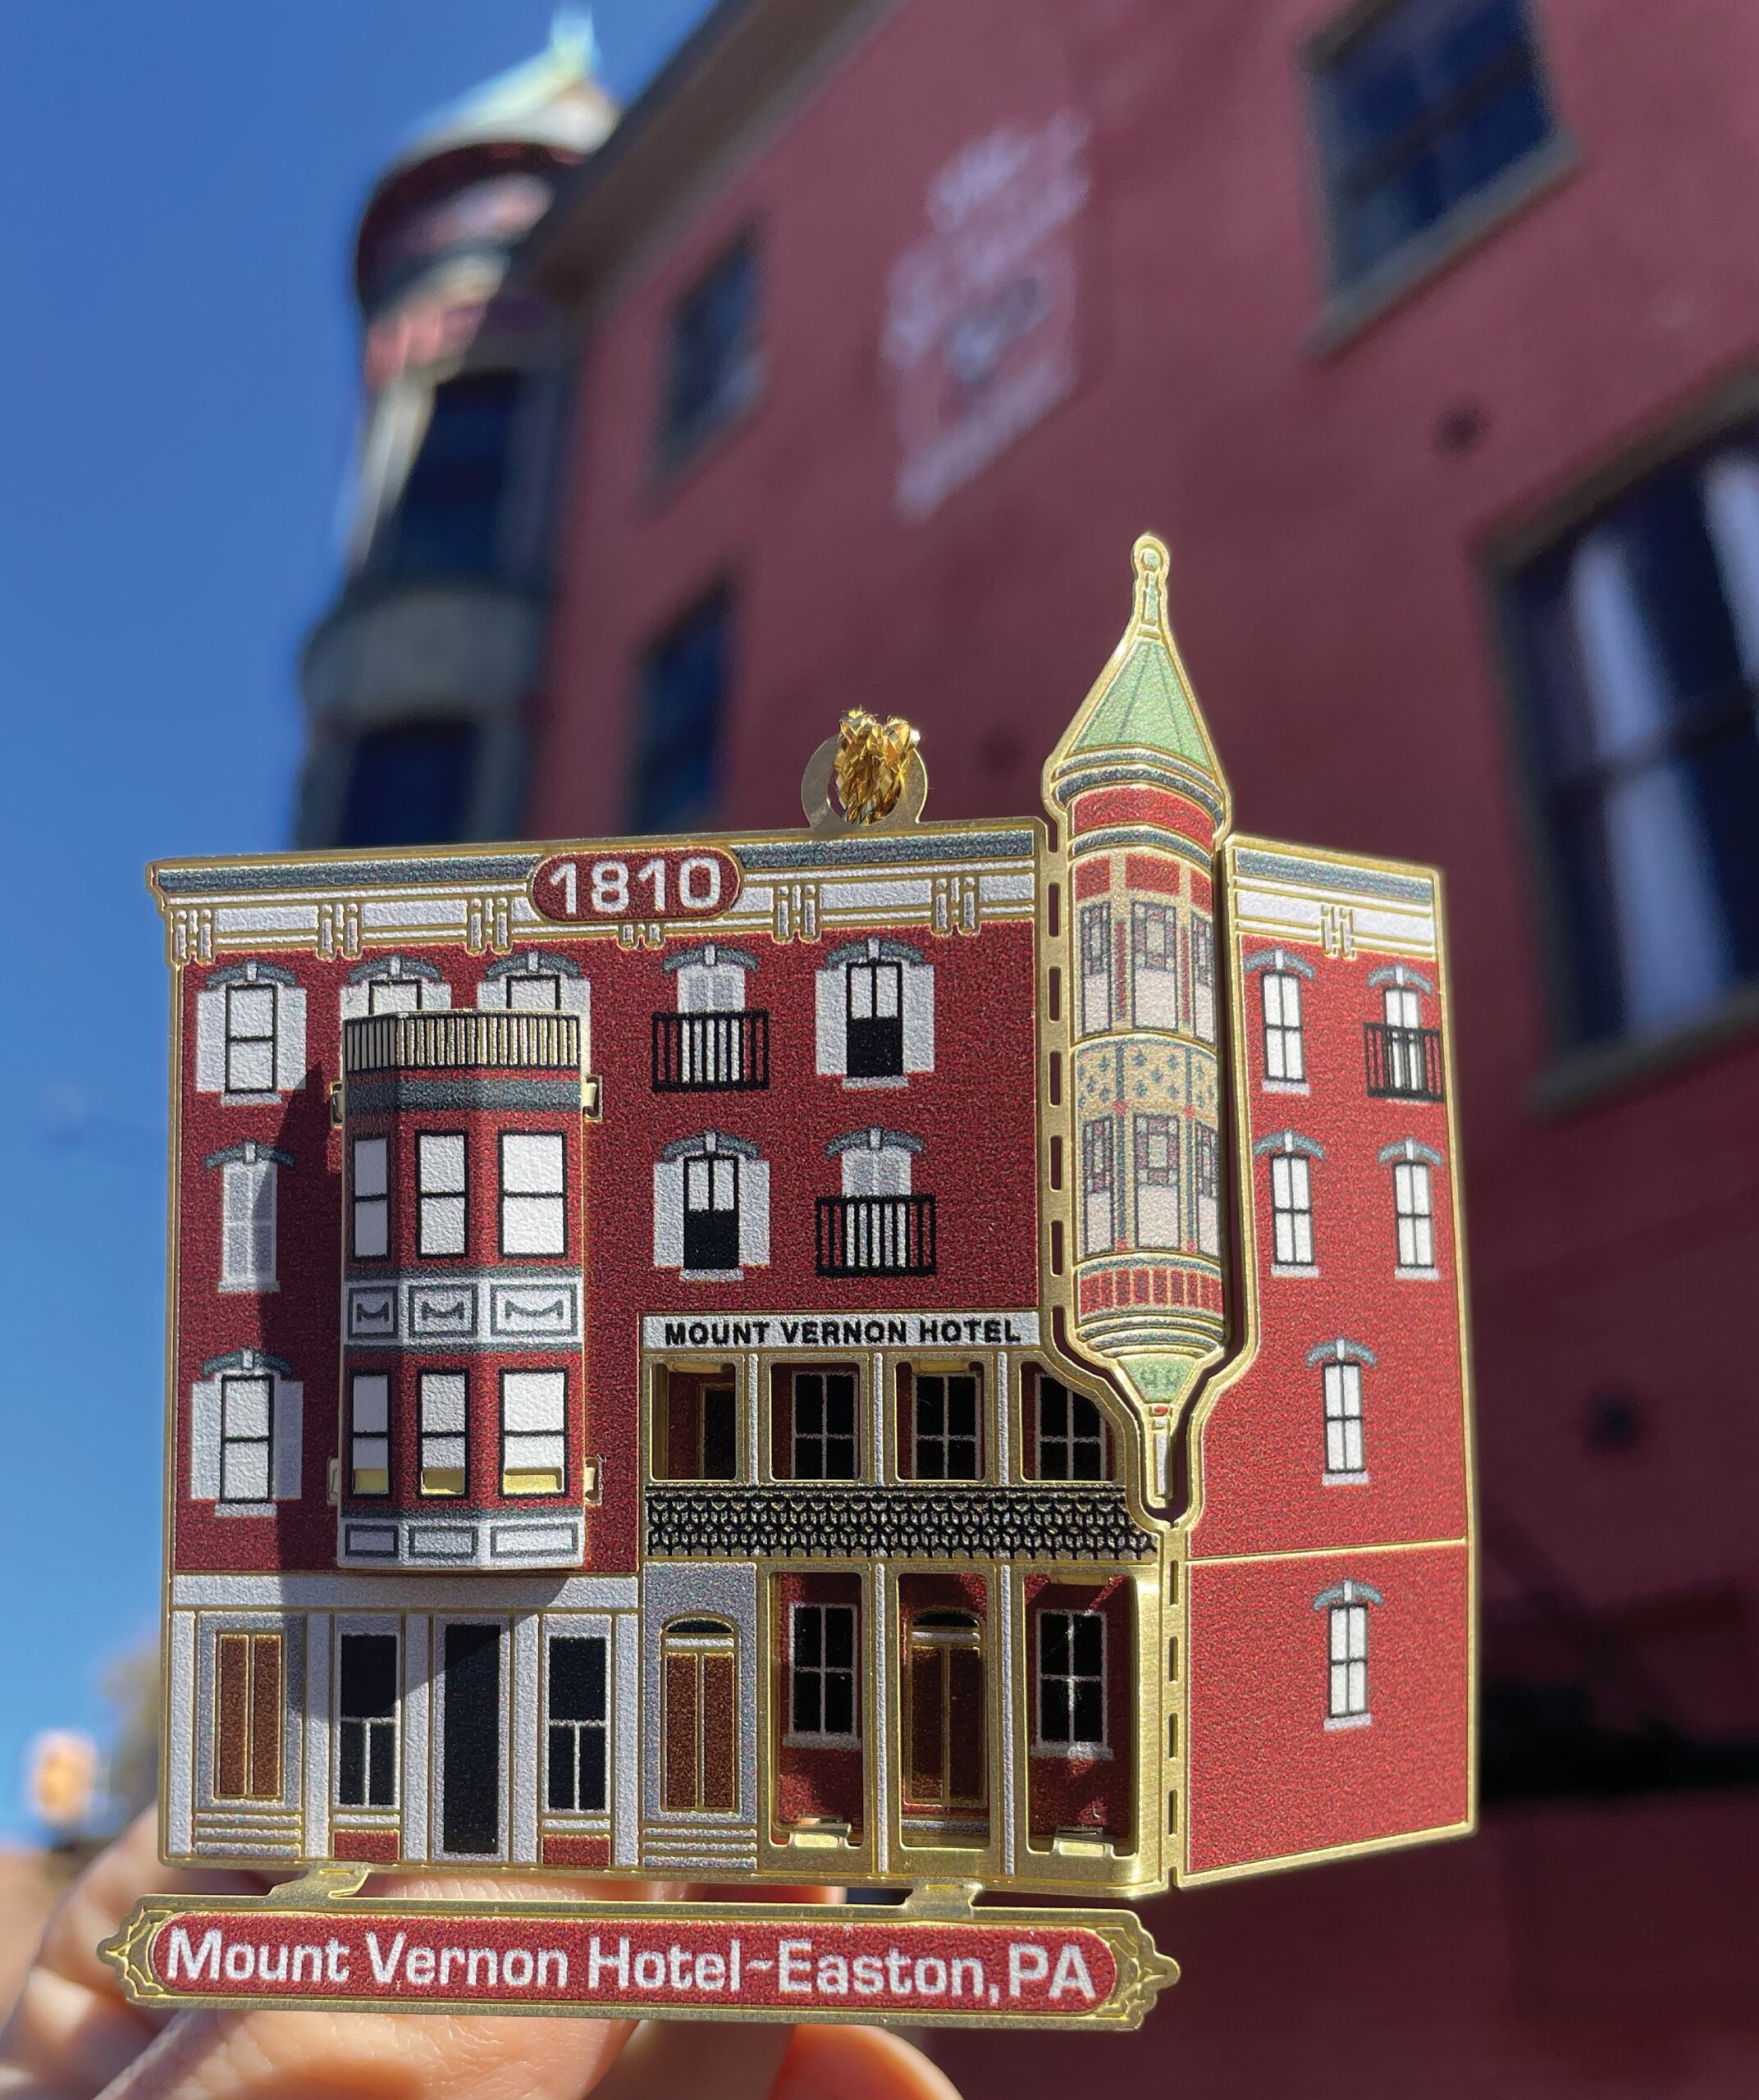 2022 Easton Holiday Ornament Unveiled: Mount Vernon Hotel